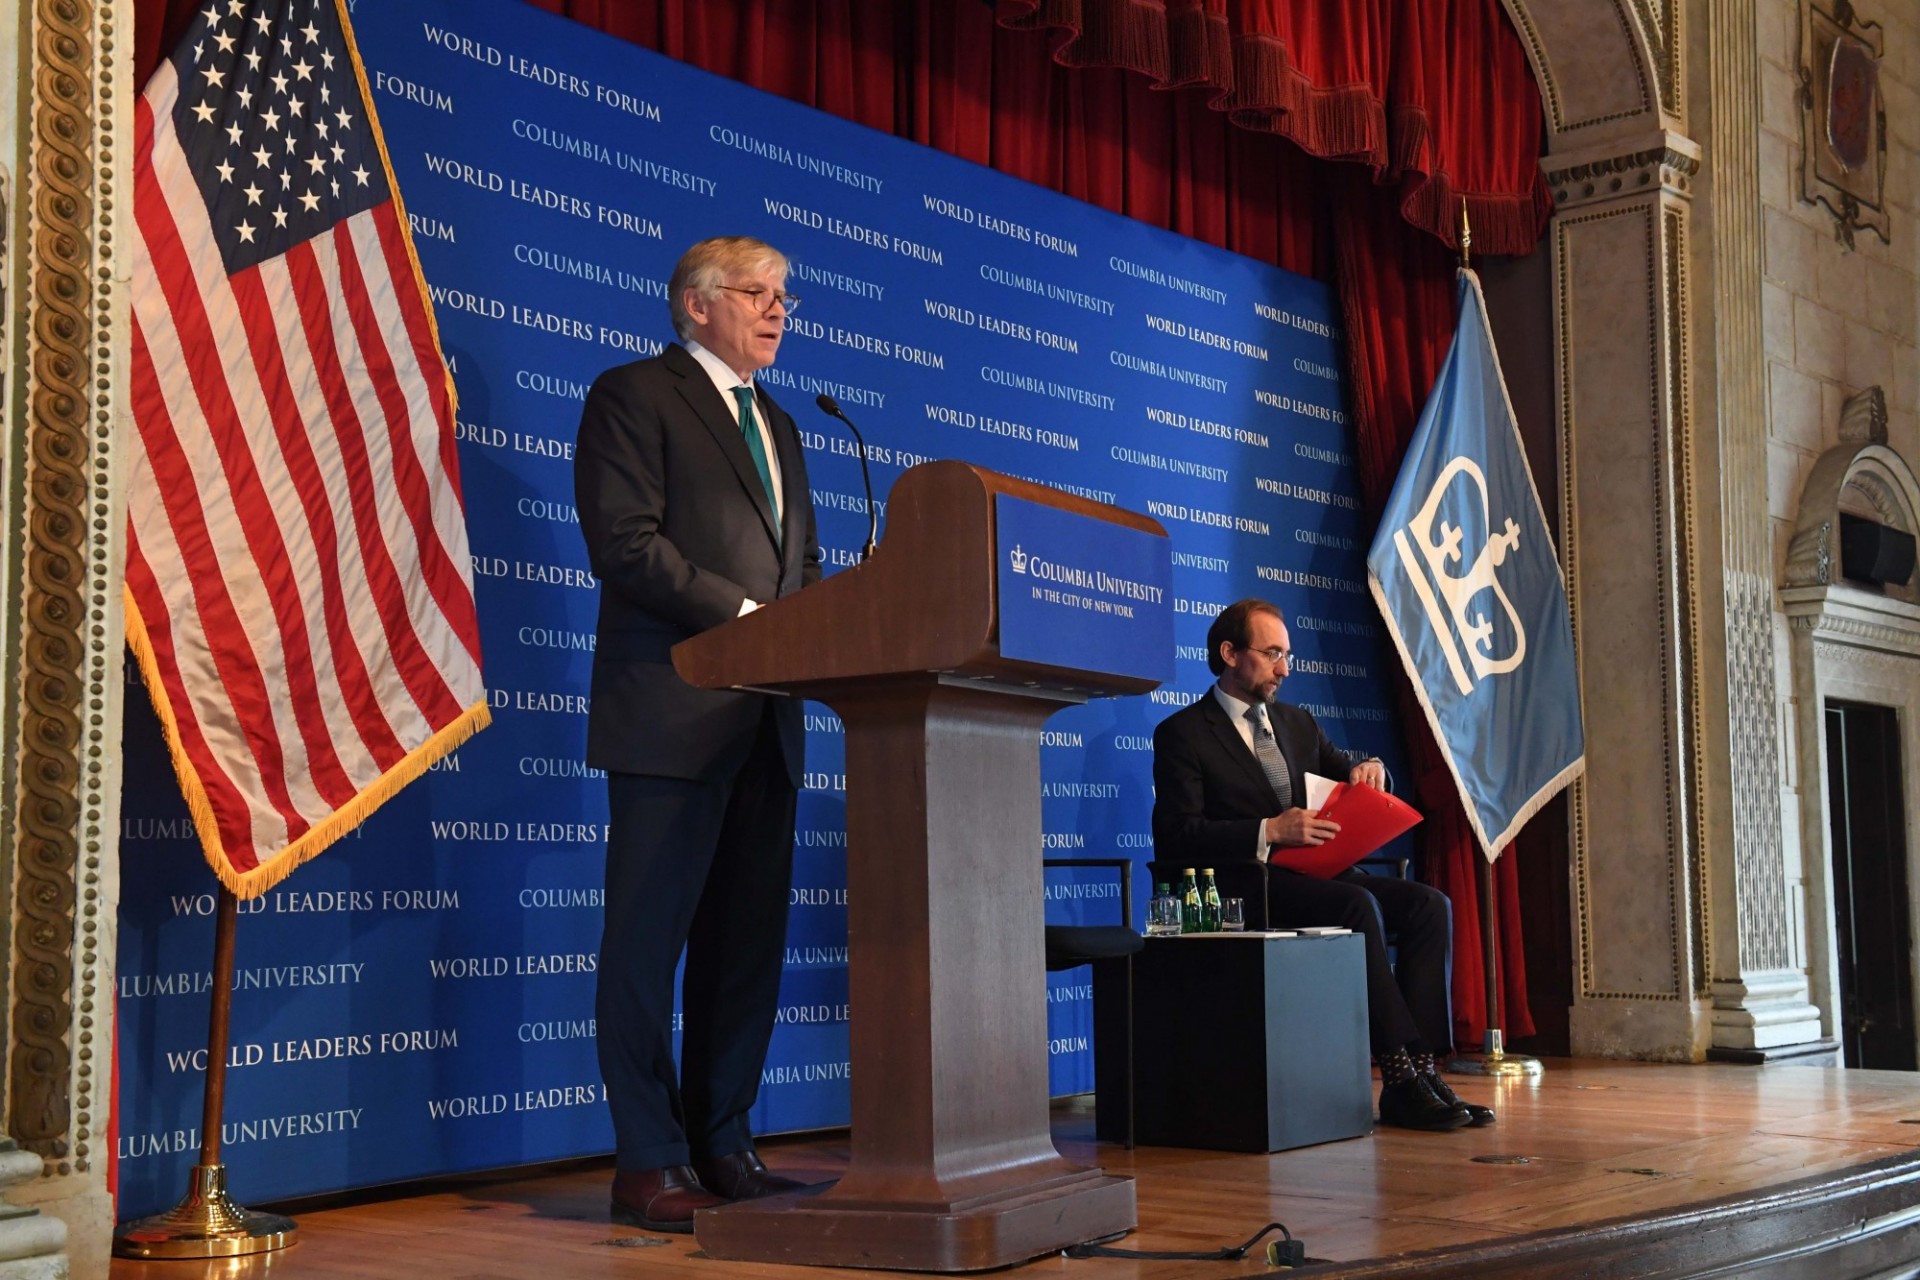 Lee C. Bollinger, President of Columbia University in the City of New York begins the World Leaders Forum with an introduction of Mr. Zeid Ra'ad Al Hussein, United Nations High Commissioner for Human Rights.